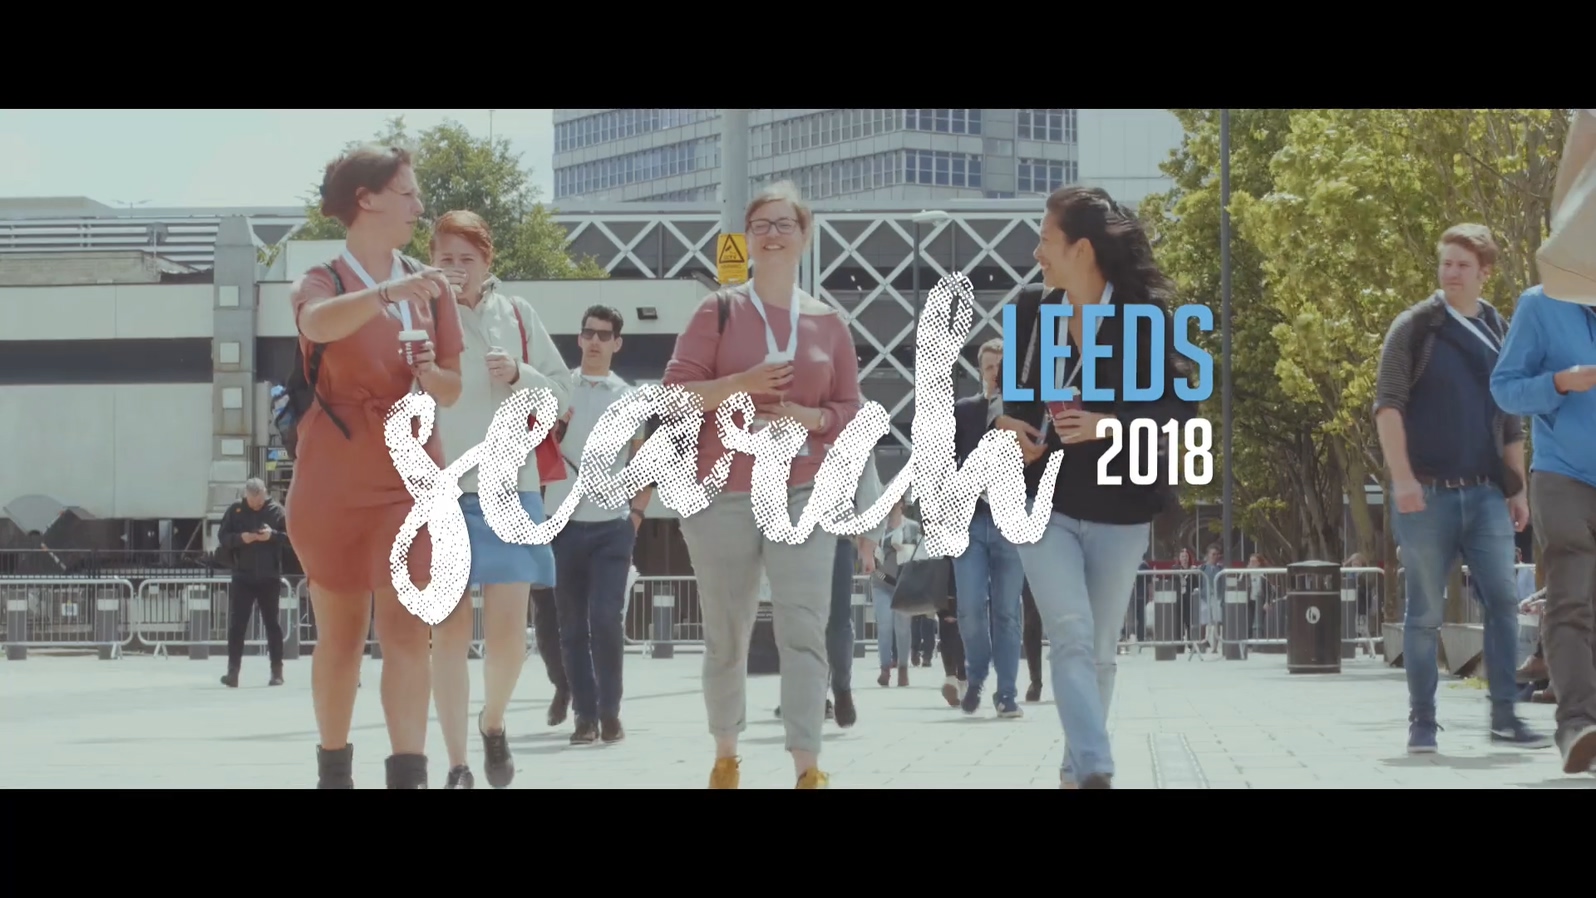 Search Leeds – Event Film